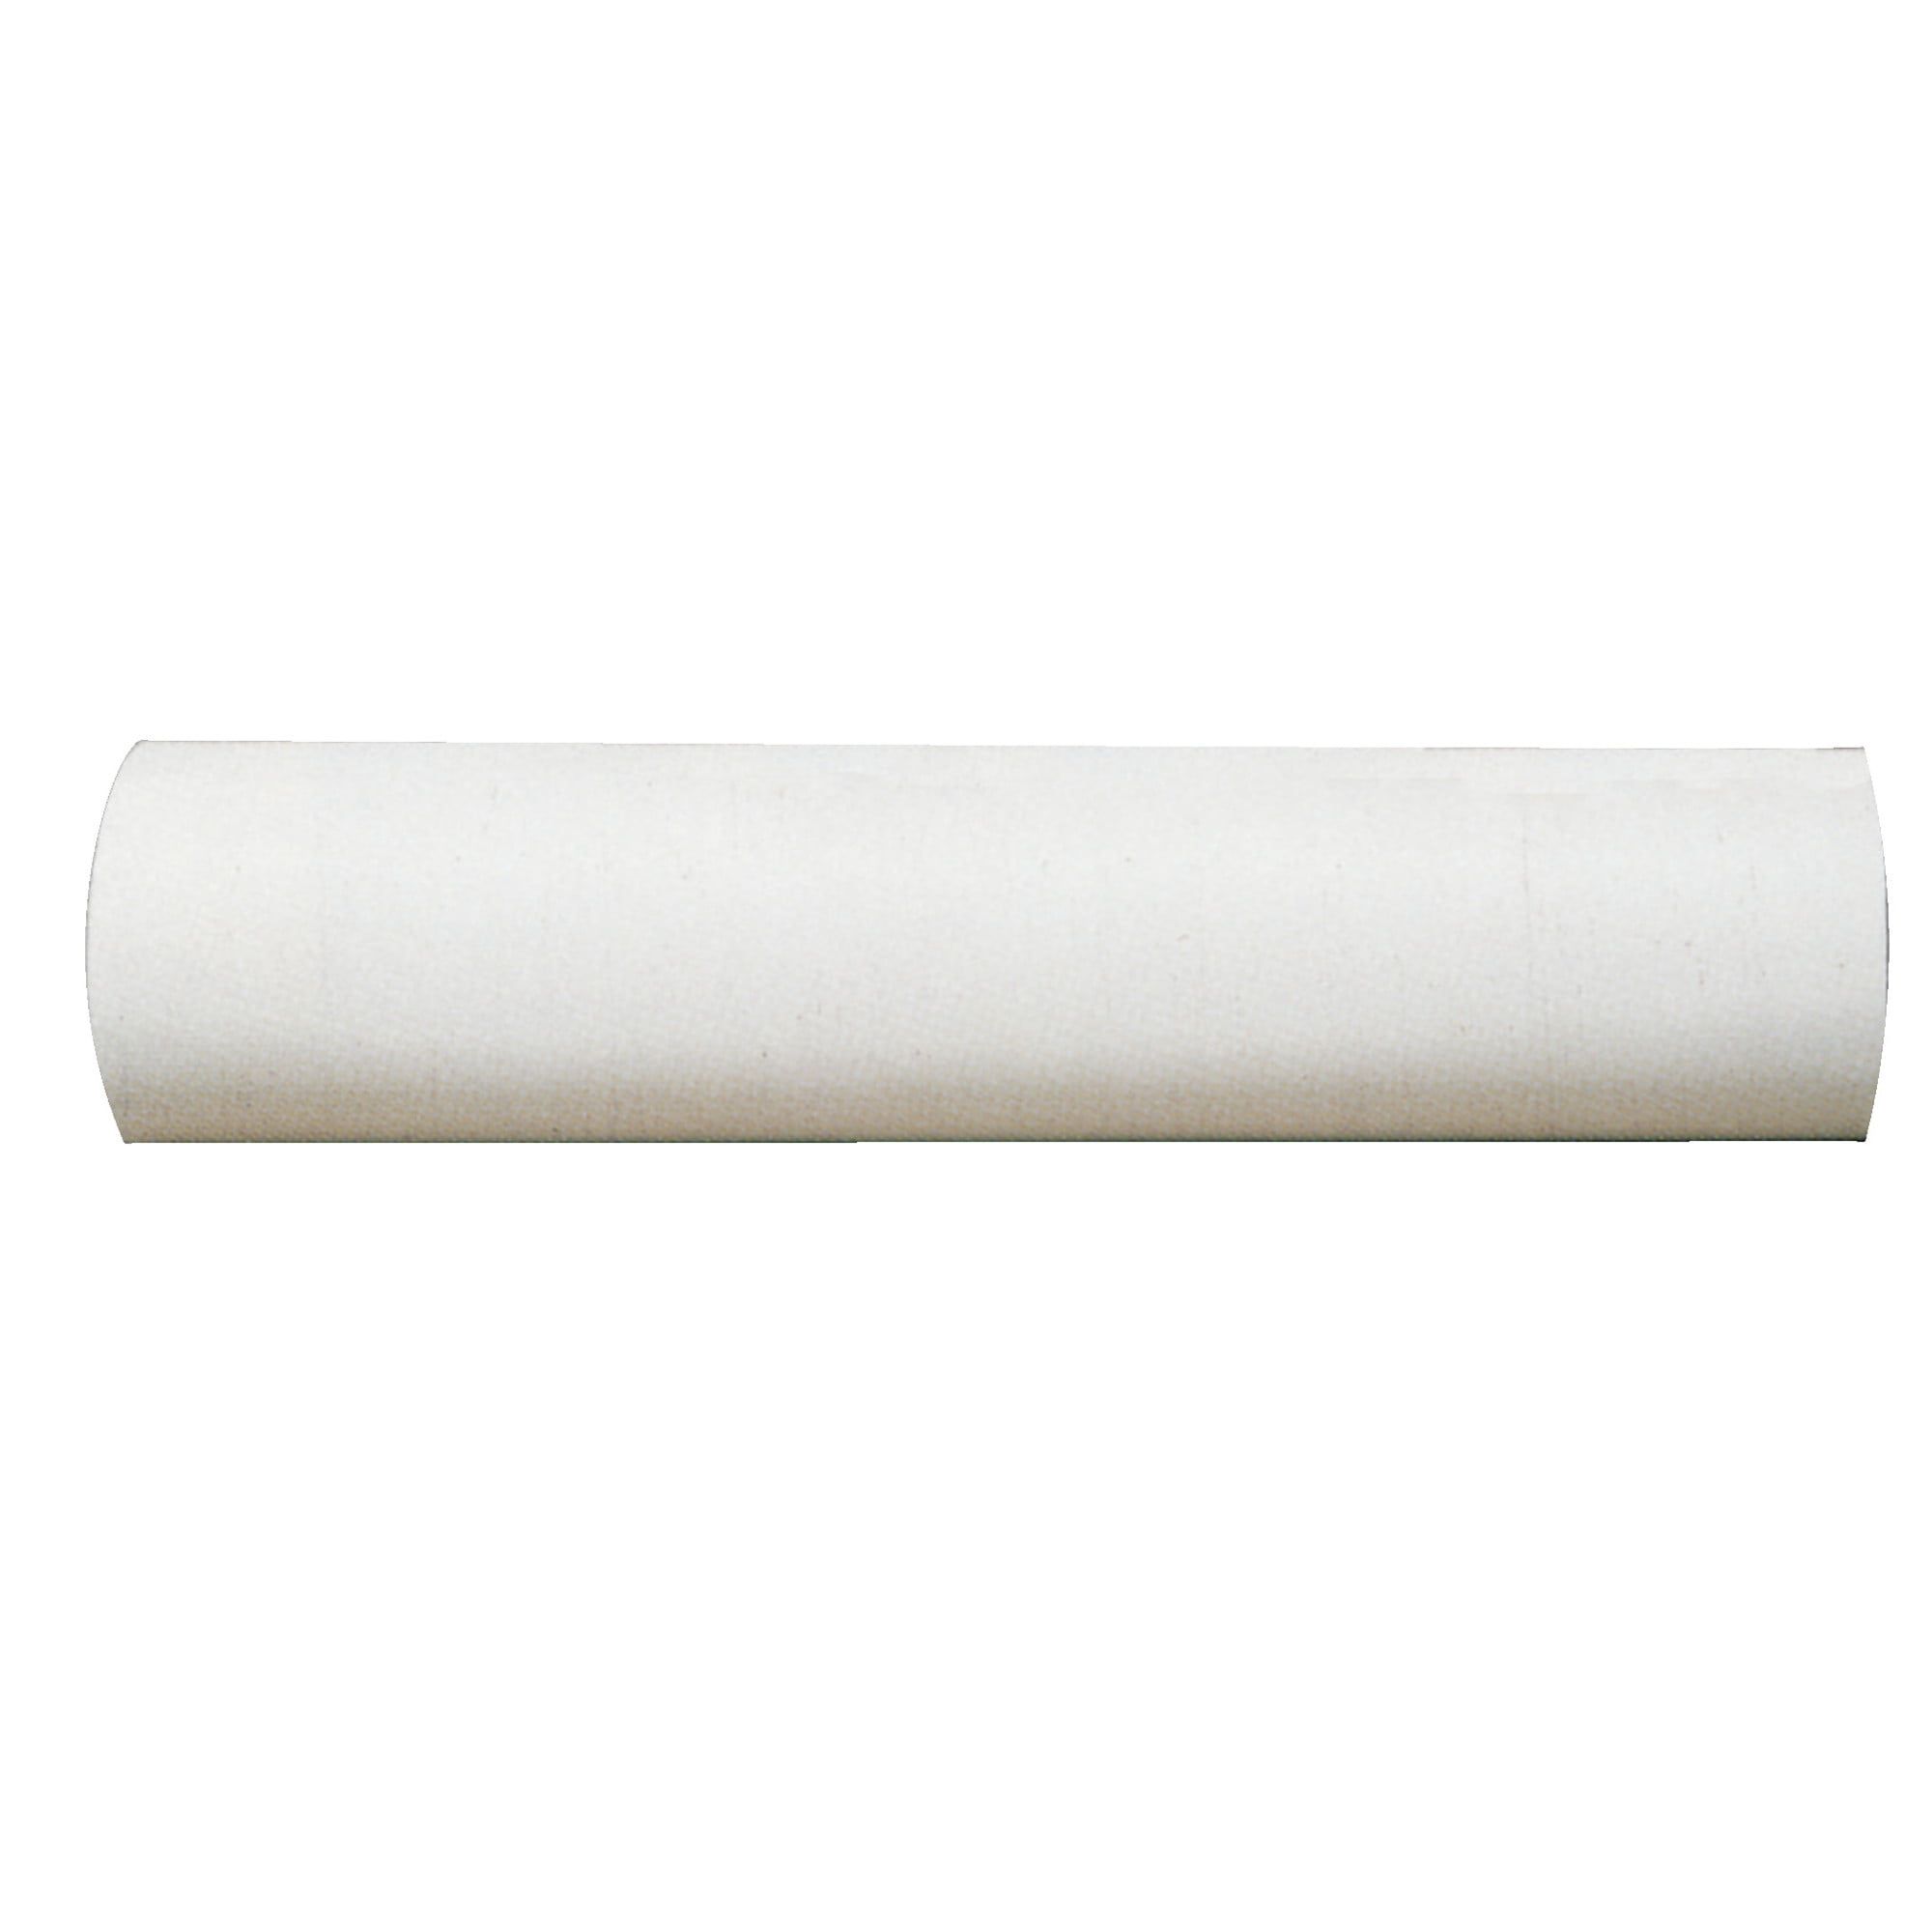 Tinksky 1Pcs Drawing Paper Roll Poster Paper Craft Paper Roll White Wrapping Paper(White), Size: 500X45cm